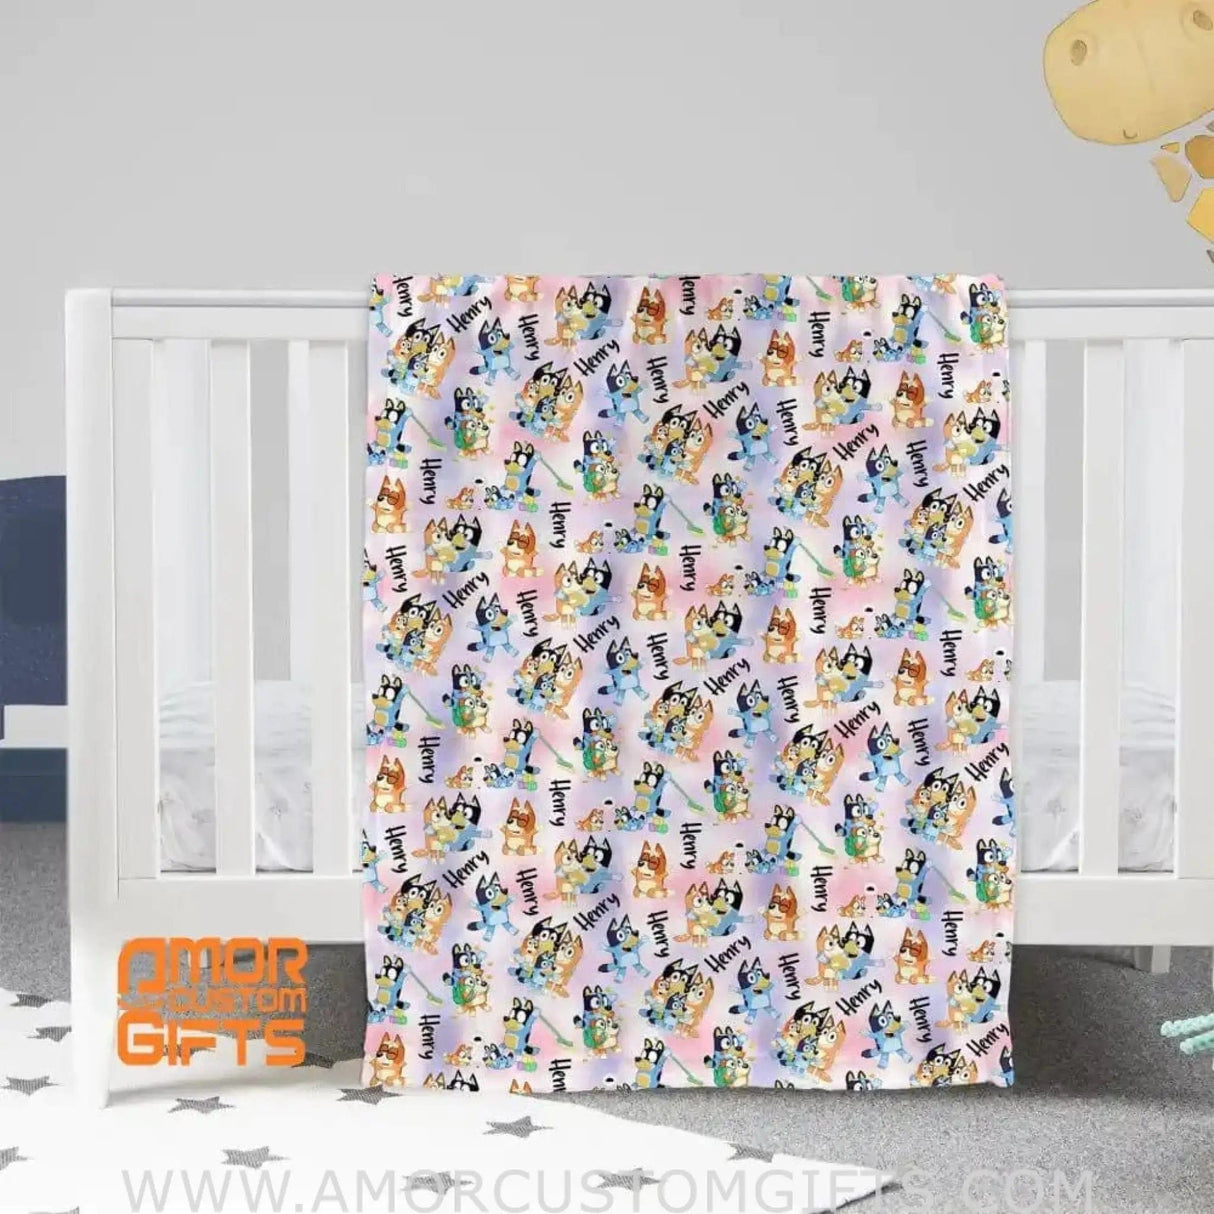 Blankets USA MADE Personalized Baby Blanket, Elephant Blanket, Elephant Crib Bedding, Elephant Nursery Theme, Newborn Blanket